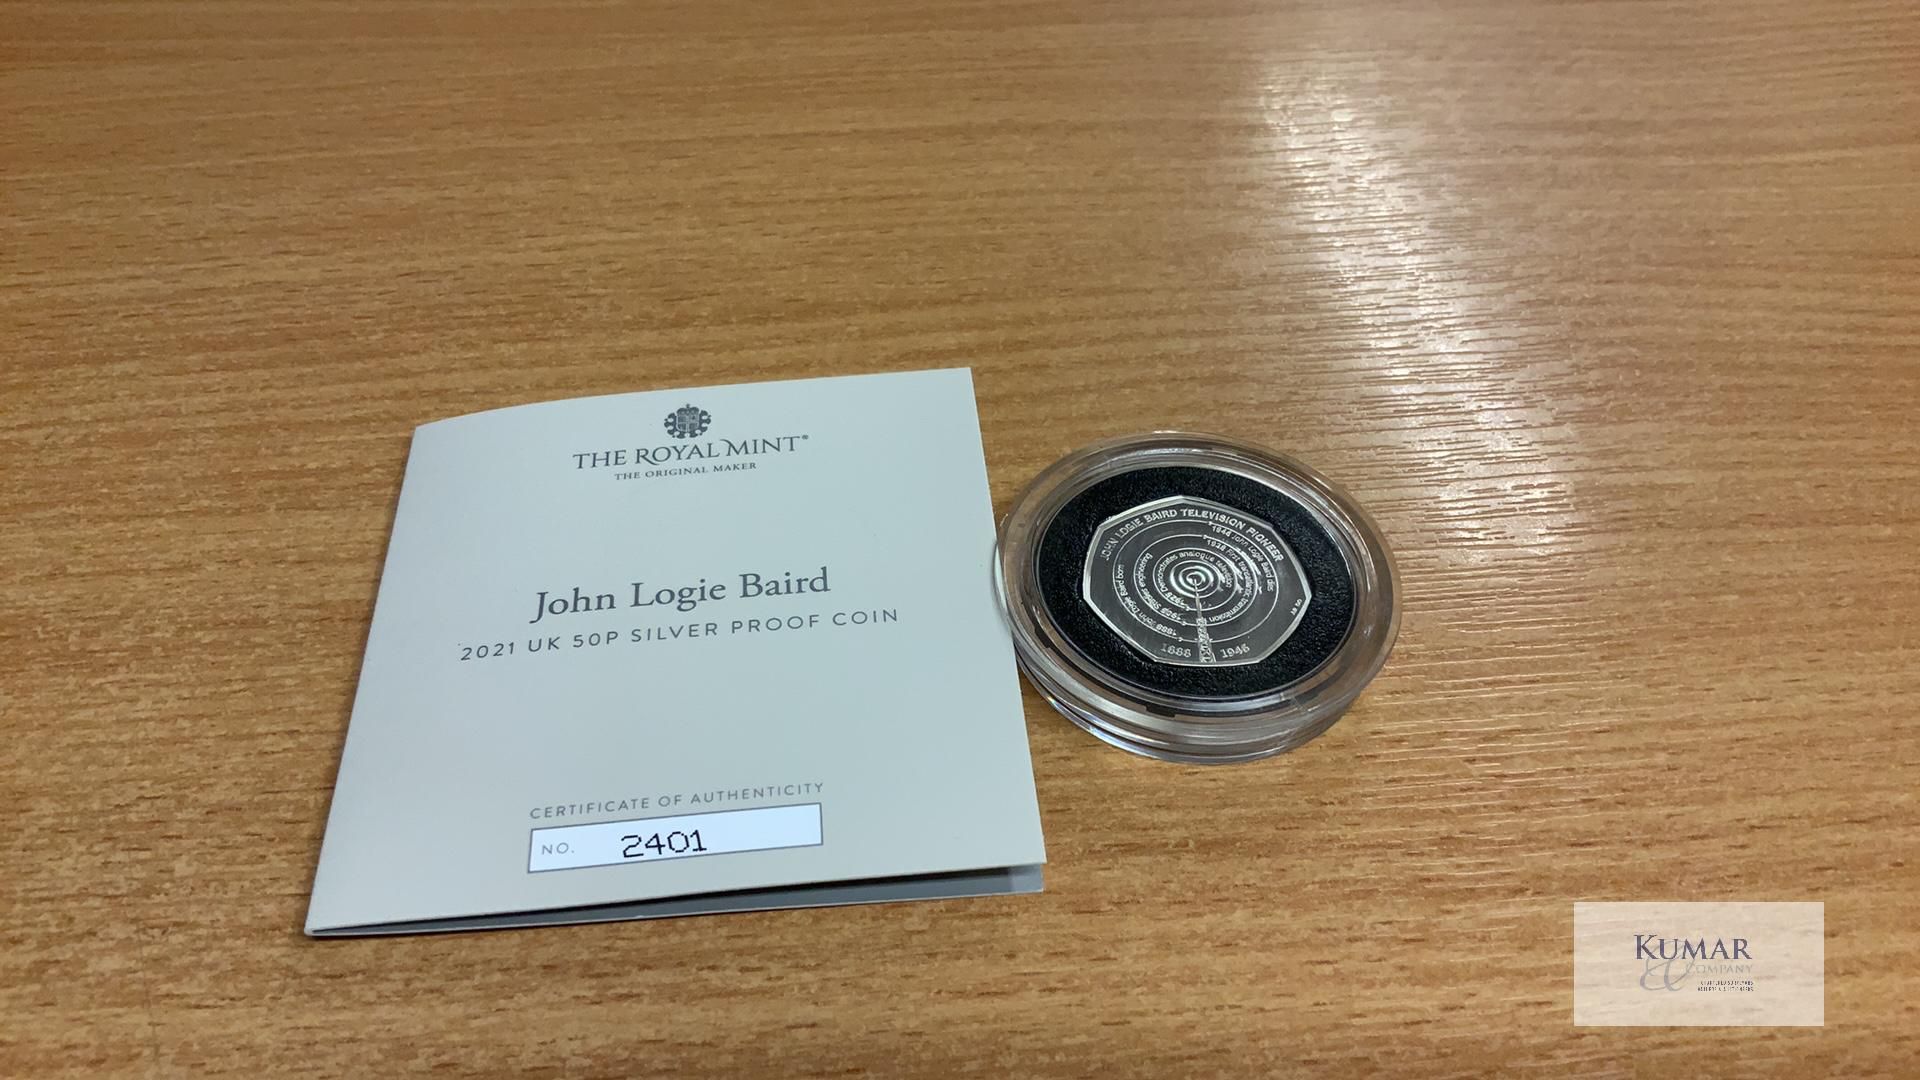 The Royal Mint Coin- John Logie Baird - The Father of Television 2021 UK 50p Silver Proof Coin - Image 3 of 4